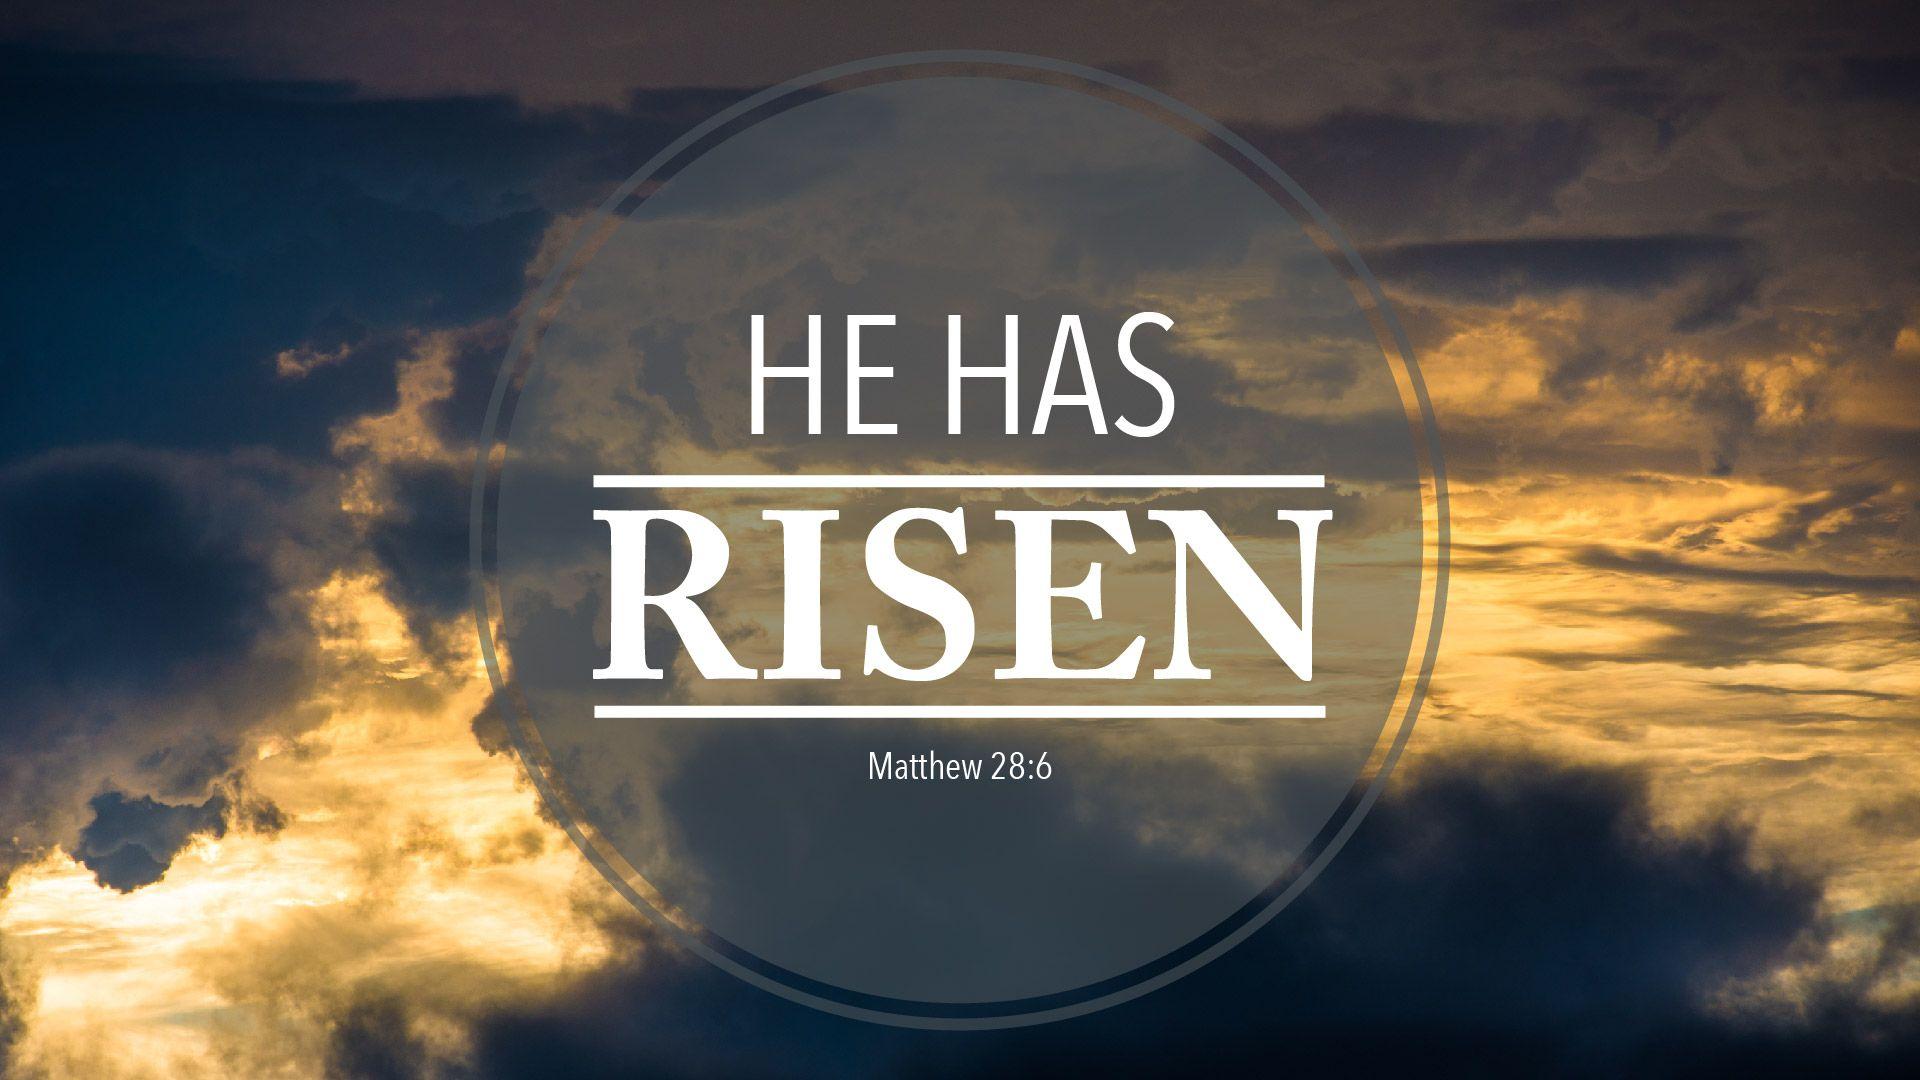 Jesus Christ Is Risen HD Wallpaper and Image Download Free